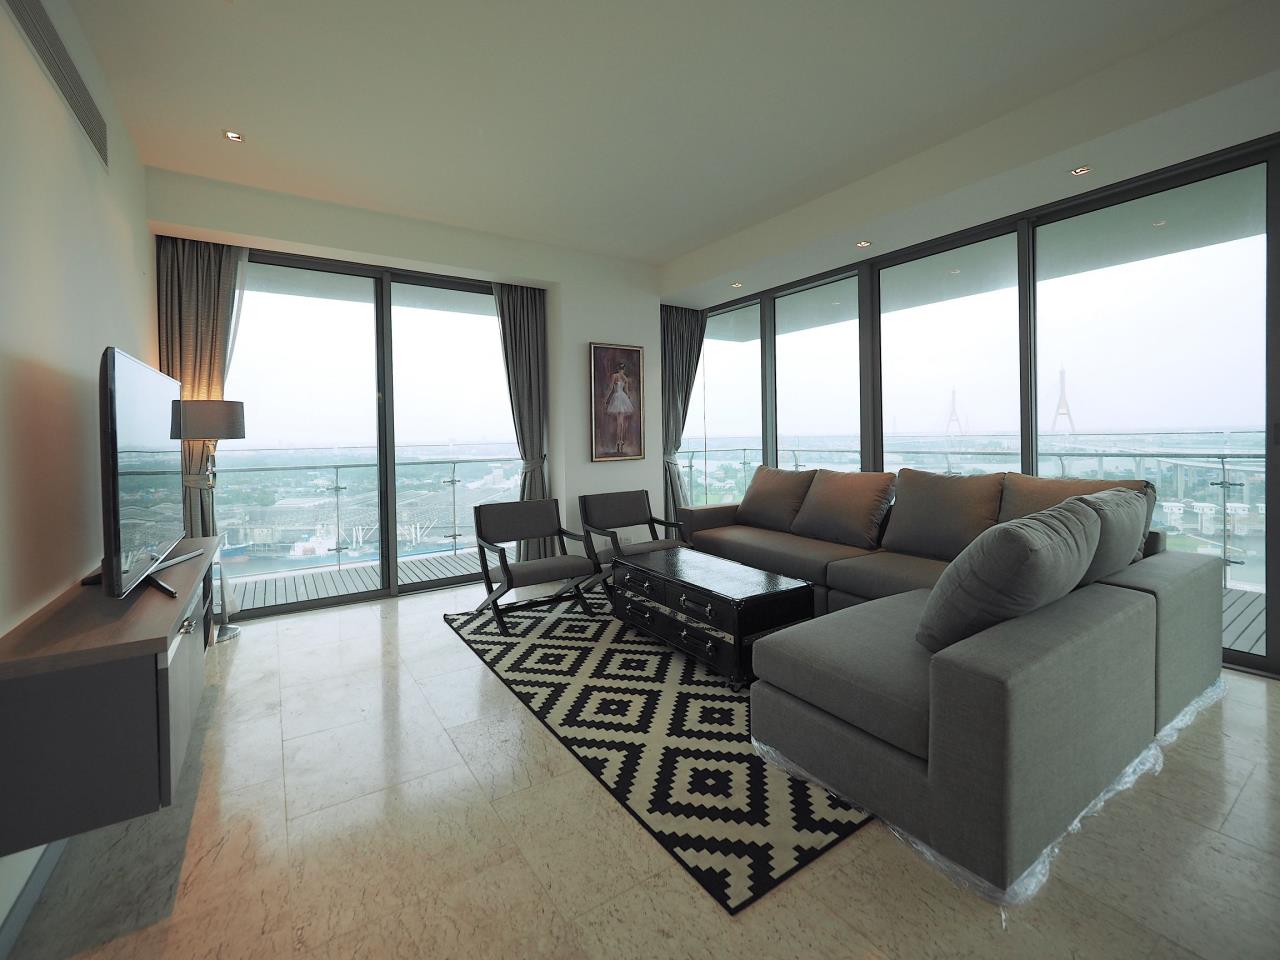 3 Bedrooms 3 Bathrooms Size 223sqm The Pano For Sale 44600000 THB, ภาพที่ 4